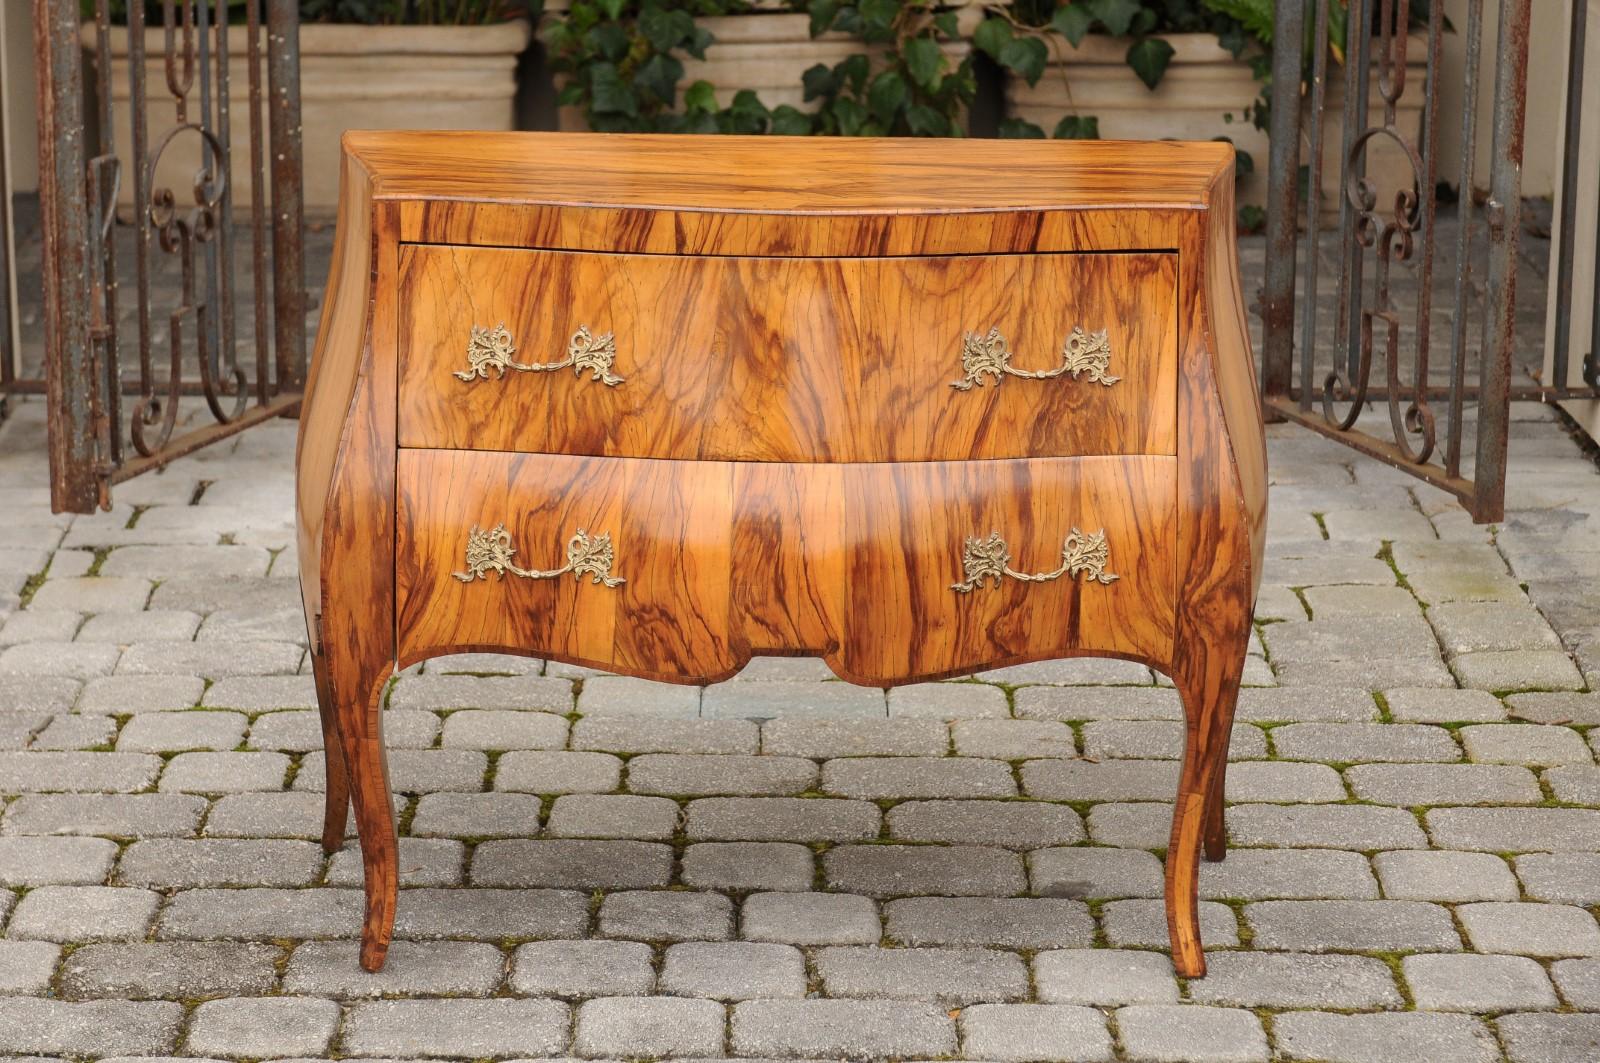 A vintage French Louis XV style olivewood veneered two-drawer bombé chest from the mid-20th century, with scalloped skirt and cabriole legs. Born in France during the midcentury period, this exquisite commode features a serpentine front top, sitting